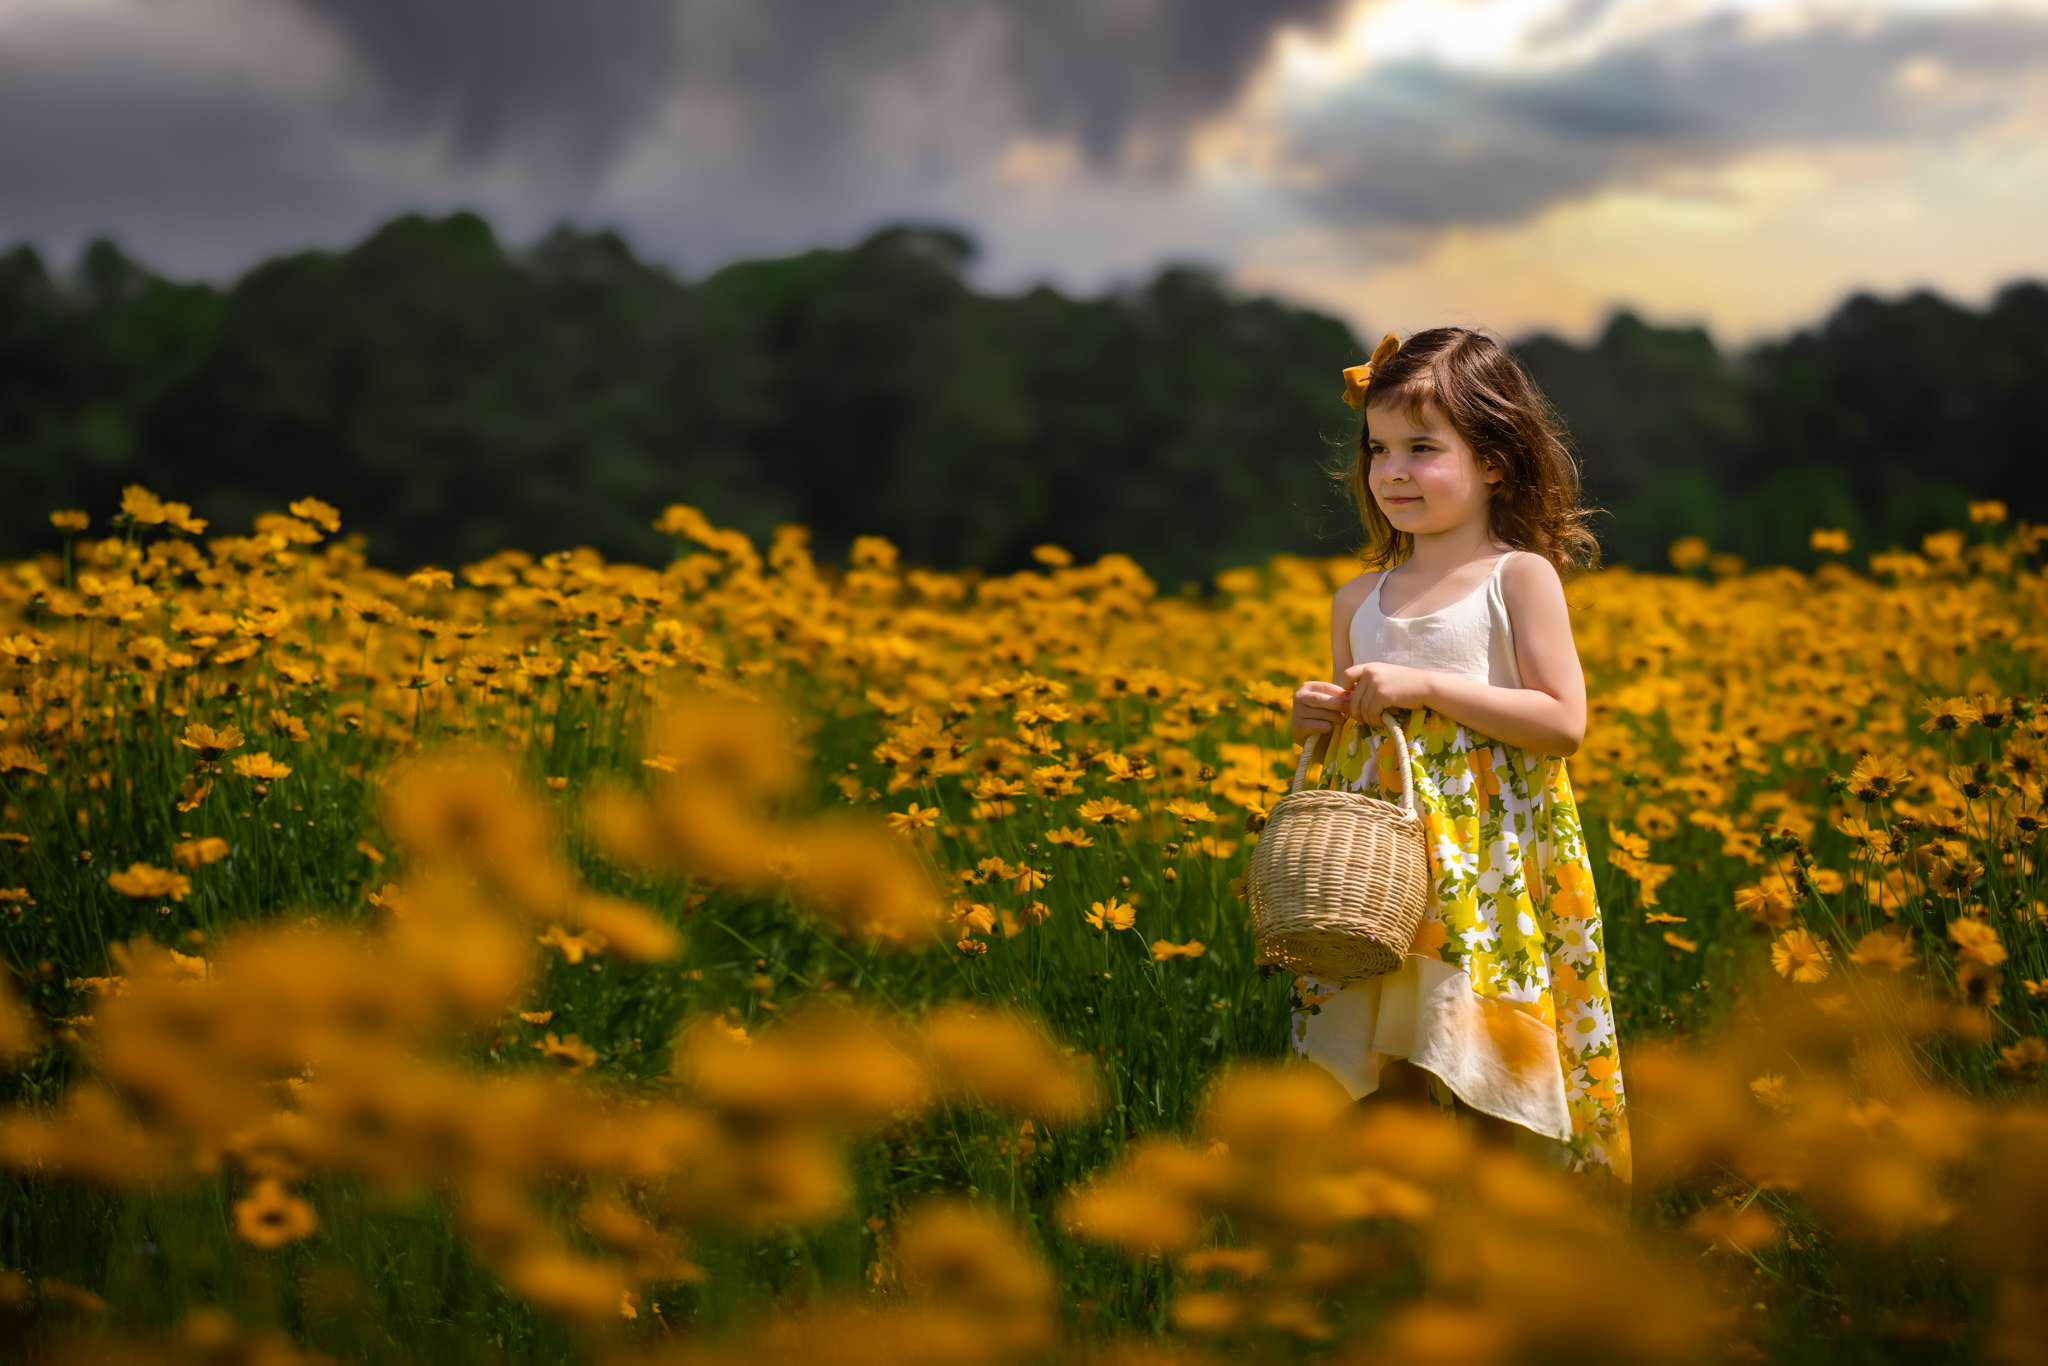 young girl standing in a field of yellow flowers holding a basket